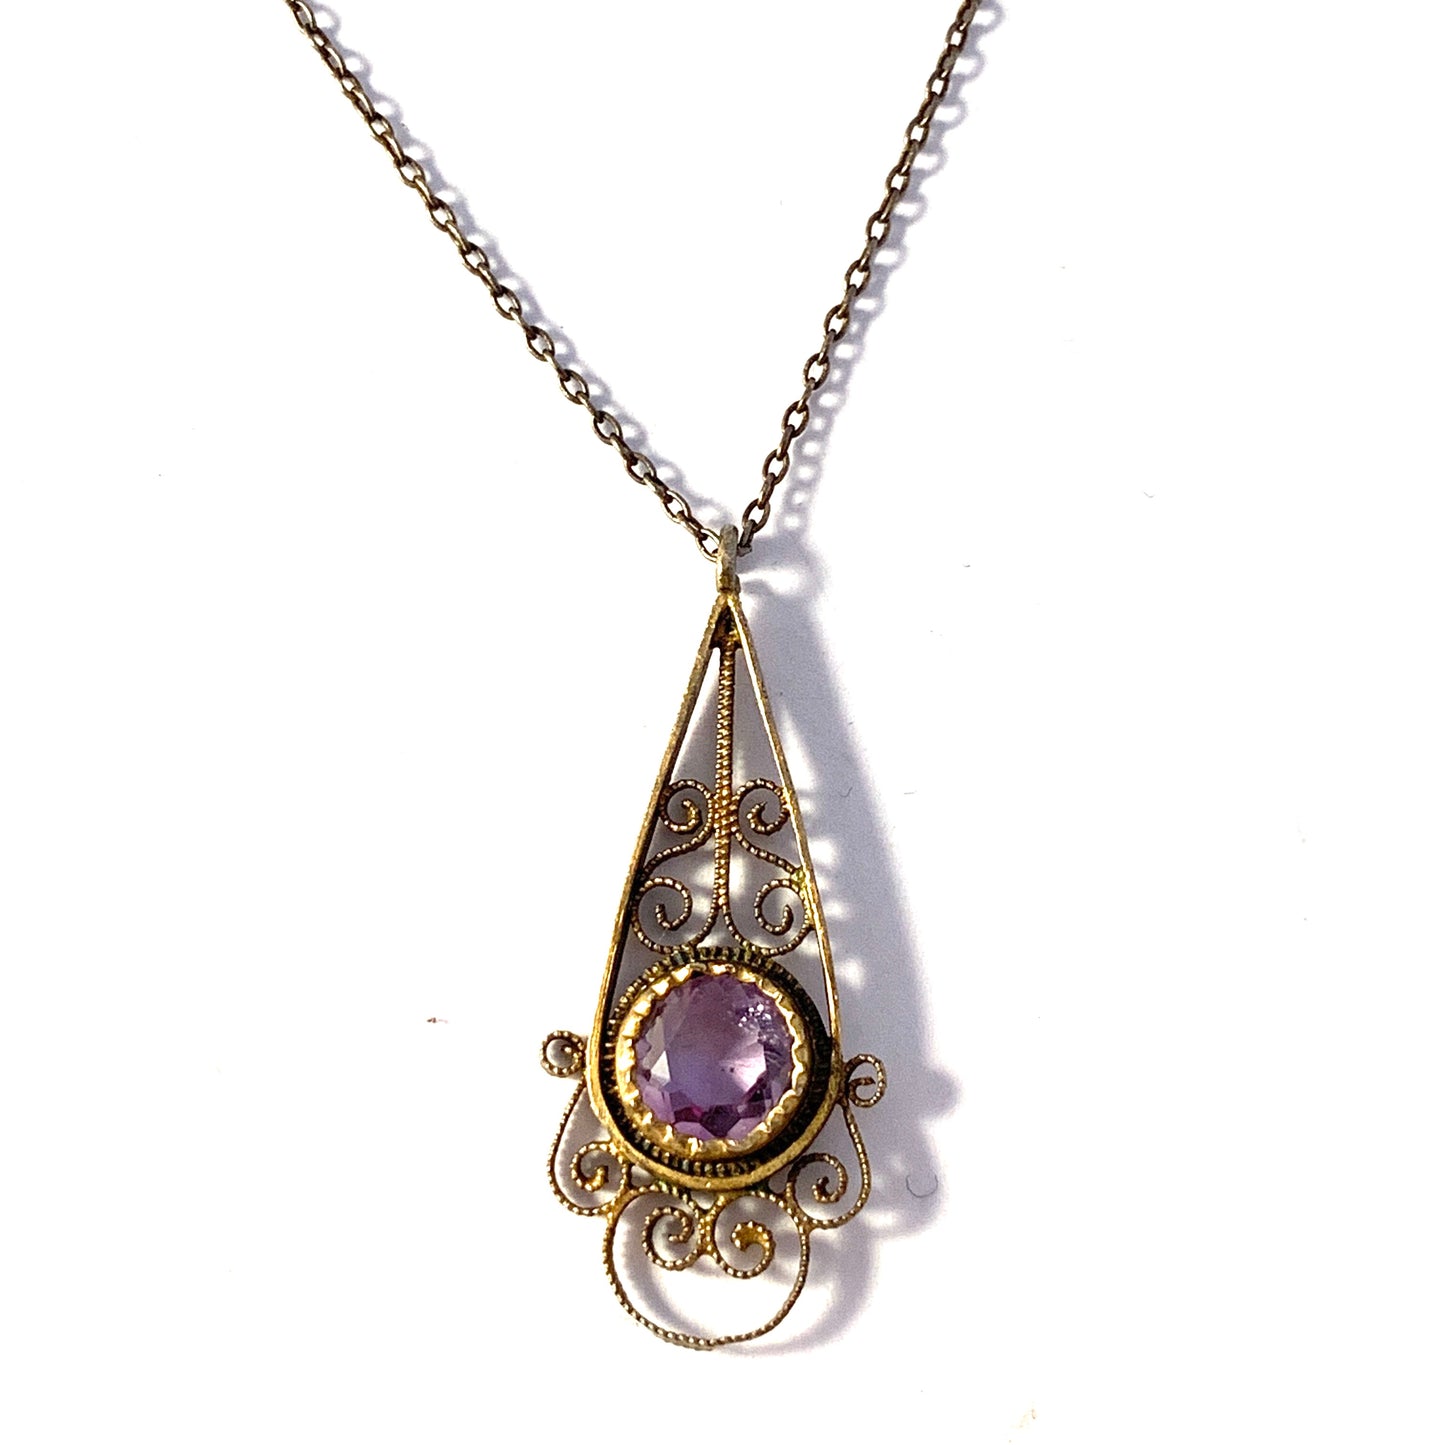 Germany early 1900s Gilt 835 Silver Amethyst Pendant Necklace.